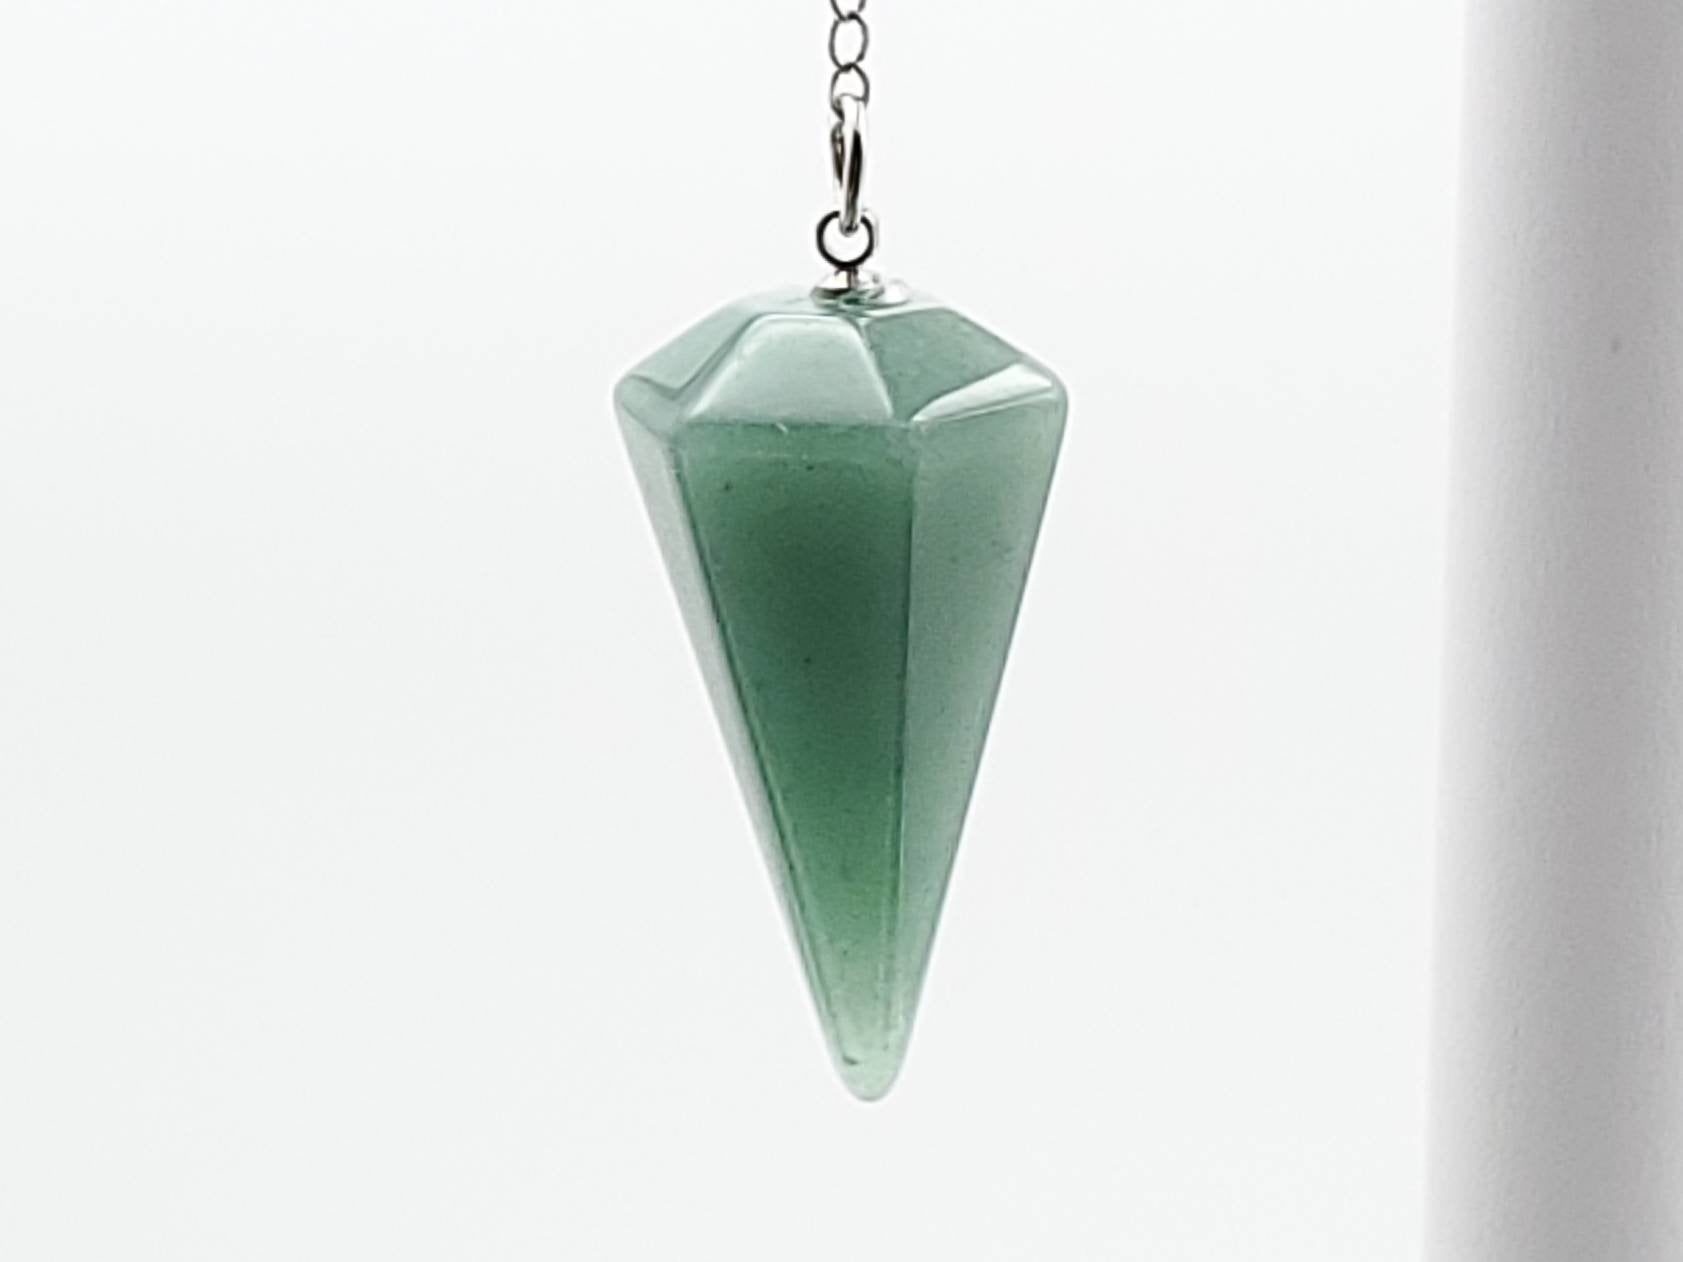 Aventurine Pendulum with Goddess, Triskelion, Triquera and Spiral Charms - The Caffeinated Raven